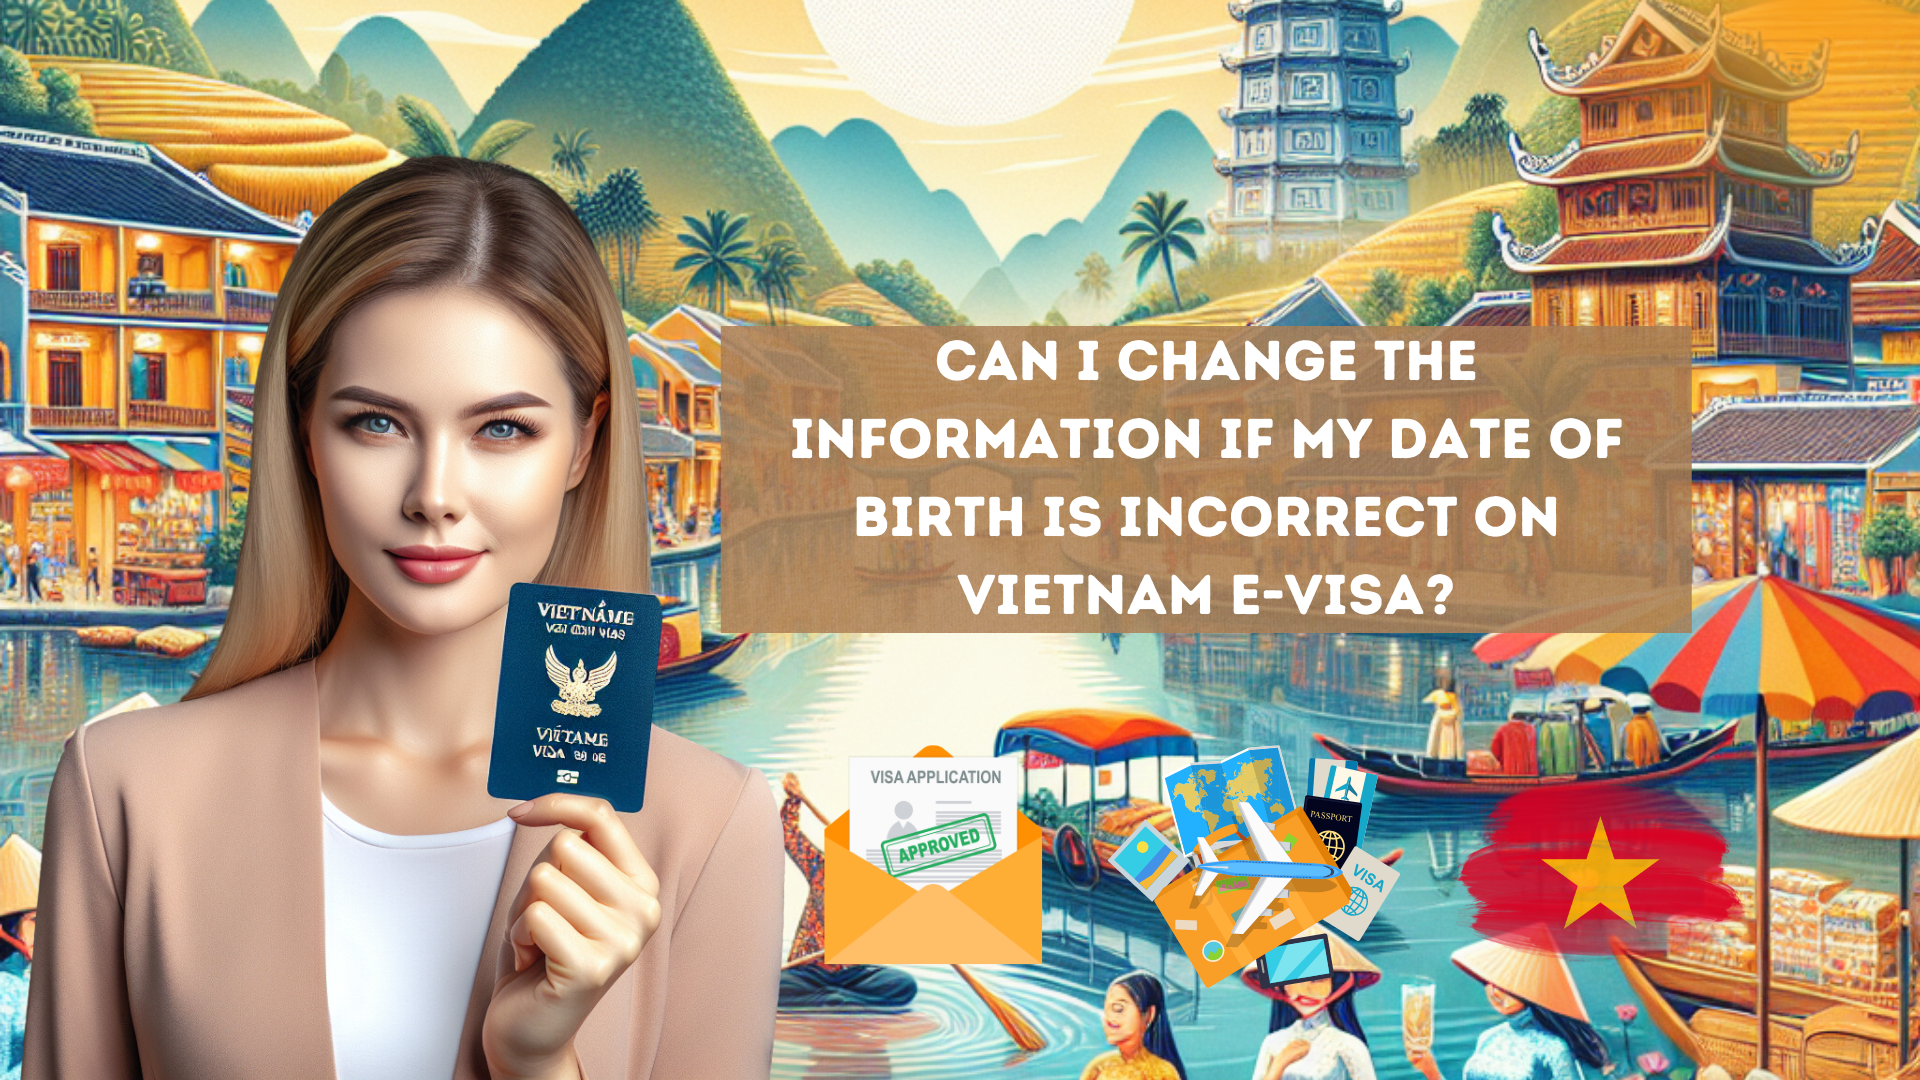 Can I Change the Information if My Date of Birth is Incorrect on Vietnam E-Visa?